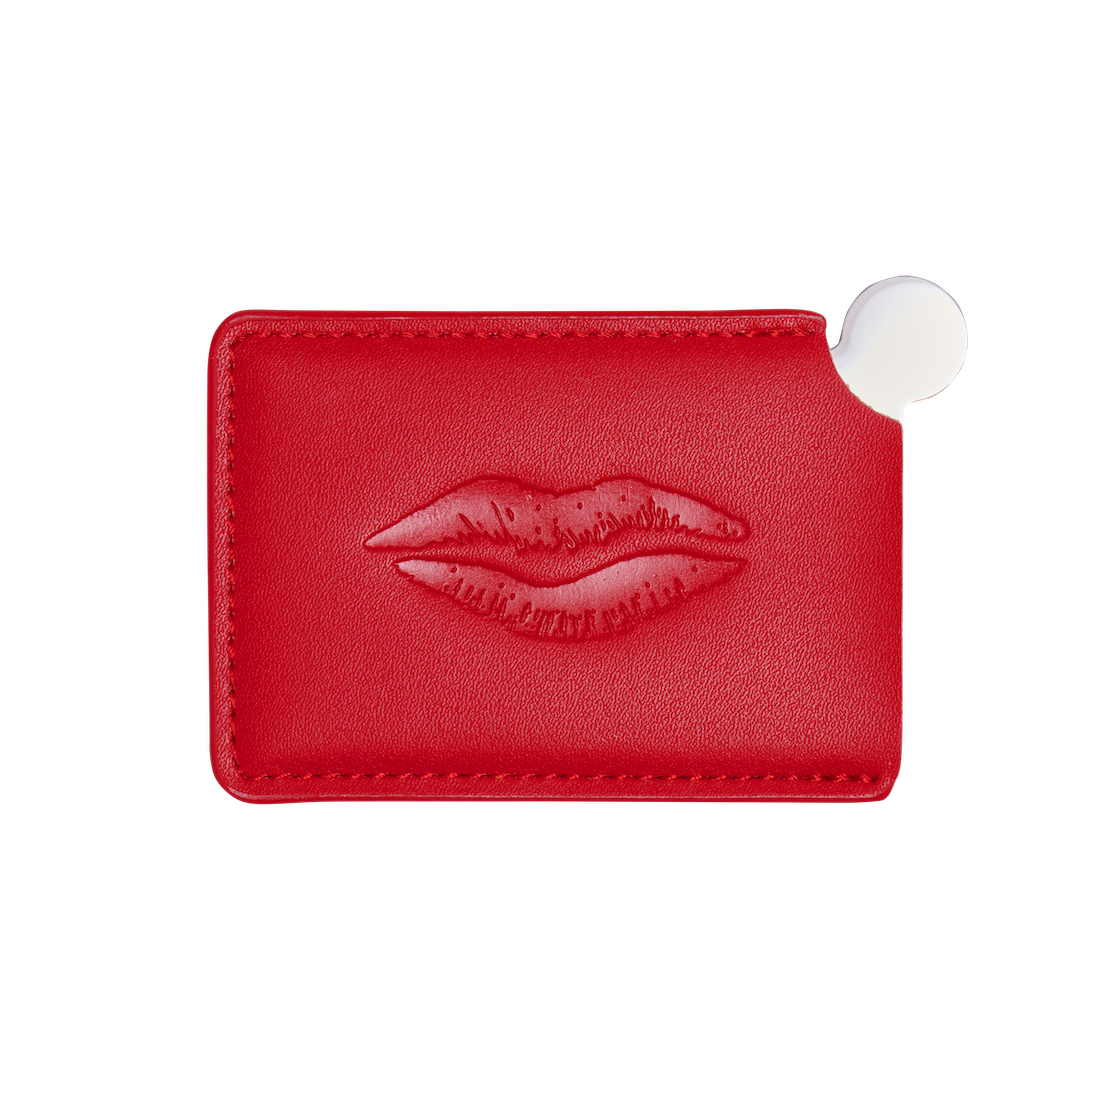 Credit Card Pocket Mirror - Choice of Colours (Pink or Red)